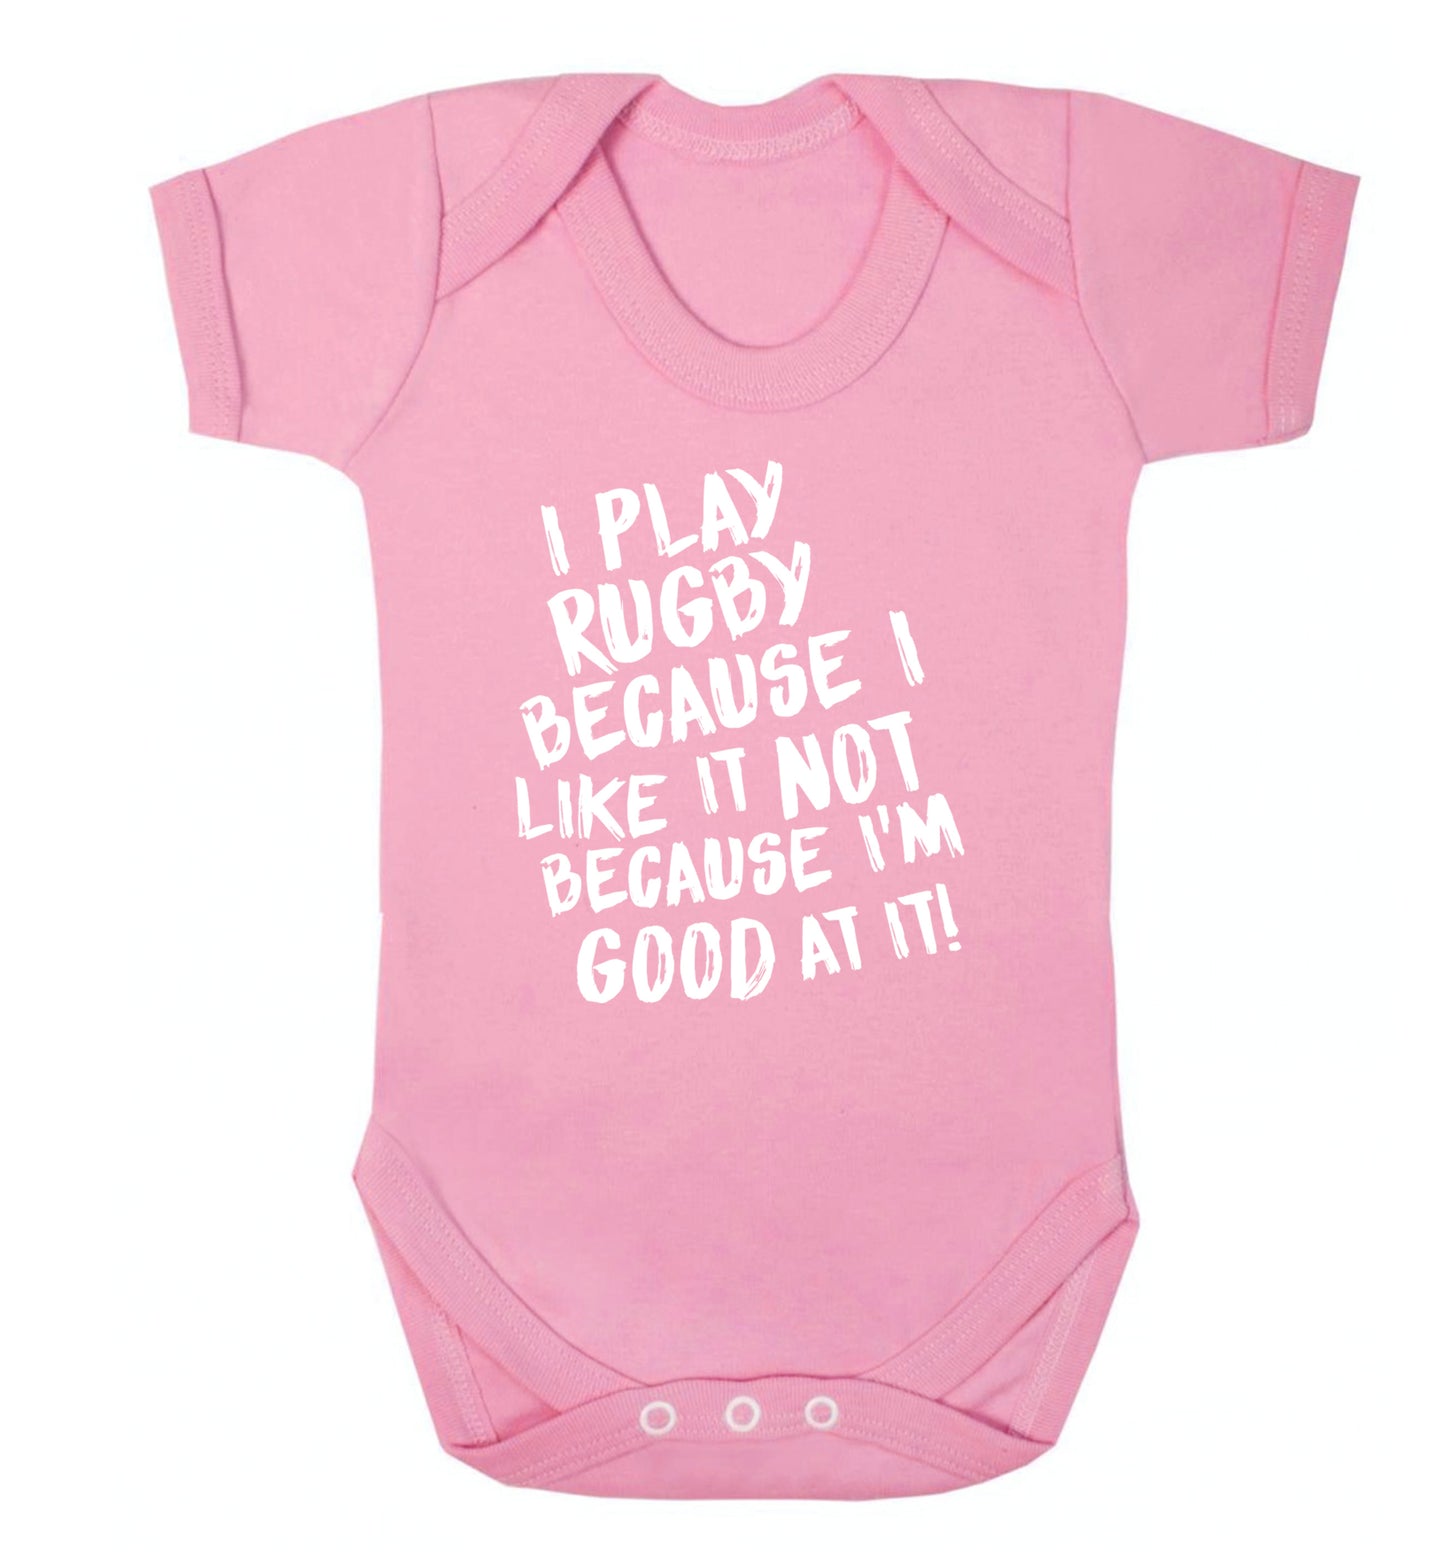 I play rugby because I like it not because I'm good at it Baby Vest pale pink 18-24 months